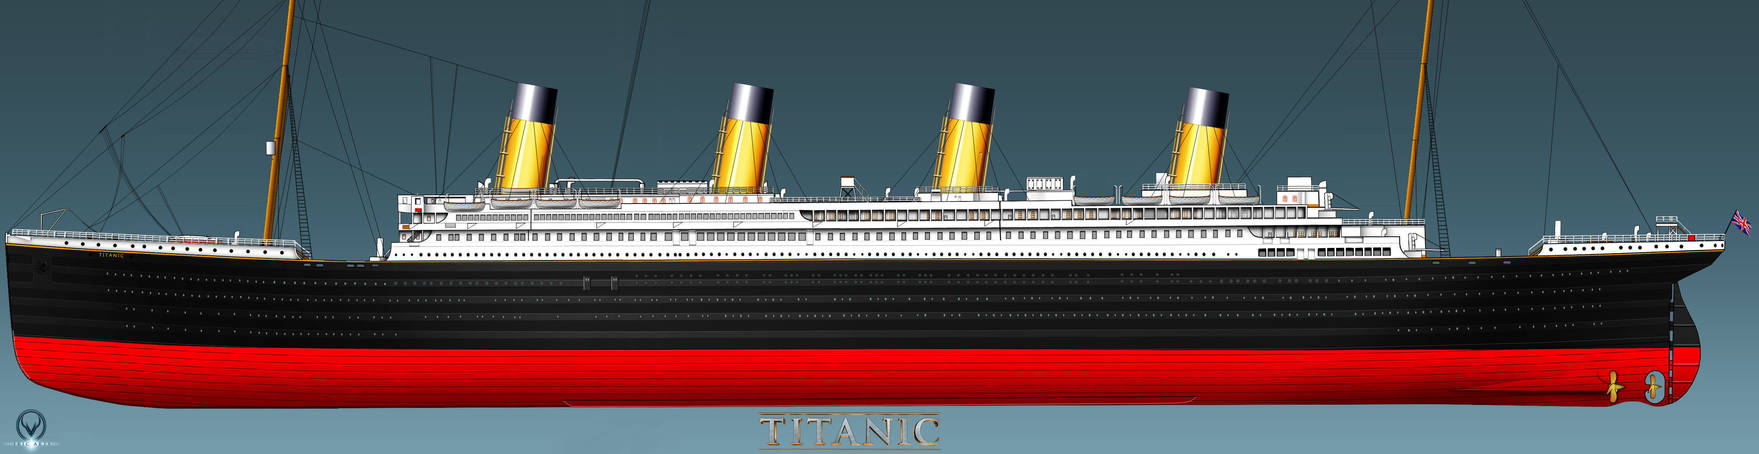 RMS TITANIC PORT SIDE PROFILE complete by ERIC-ARTS-inc on DeviantArt